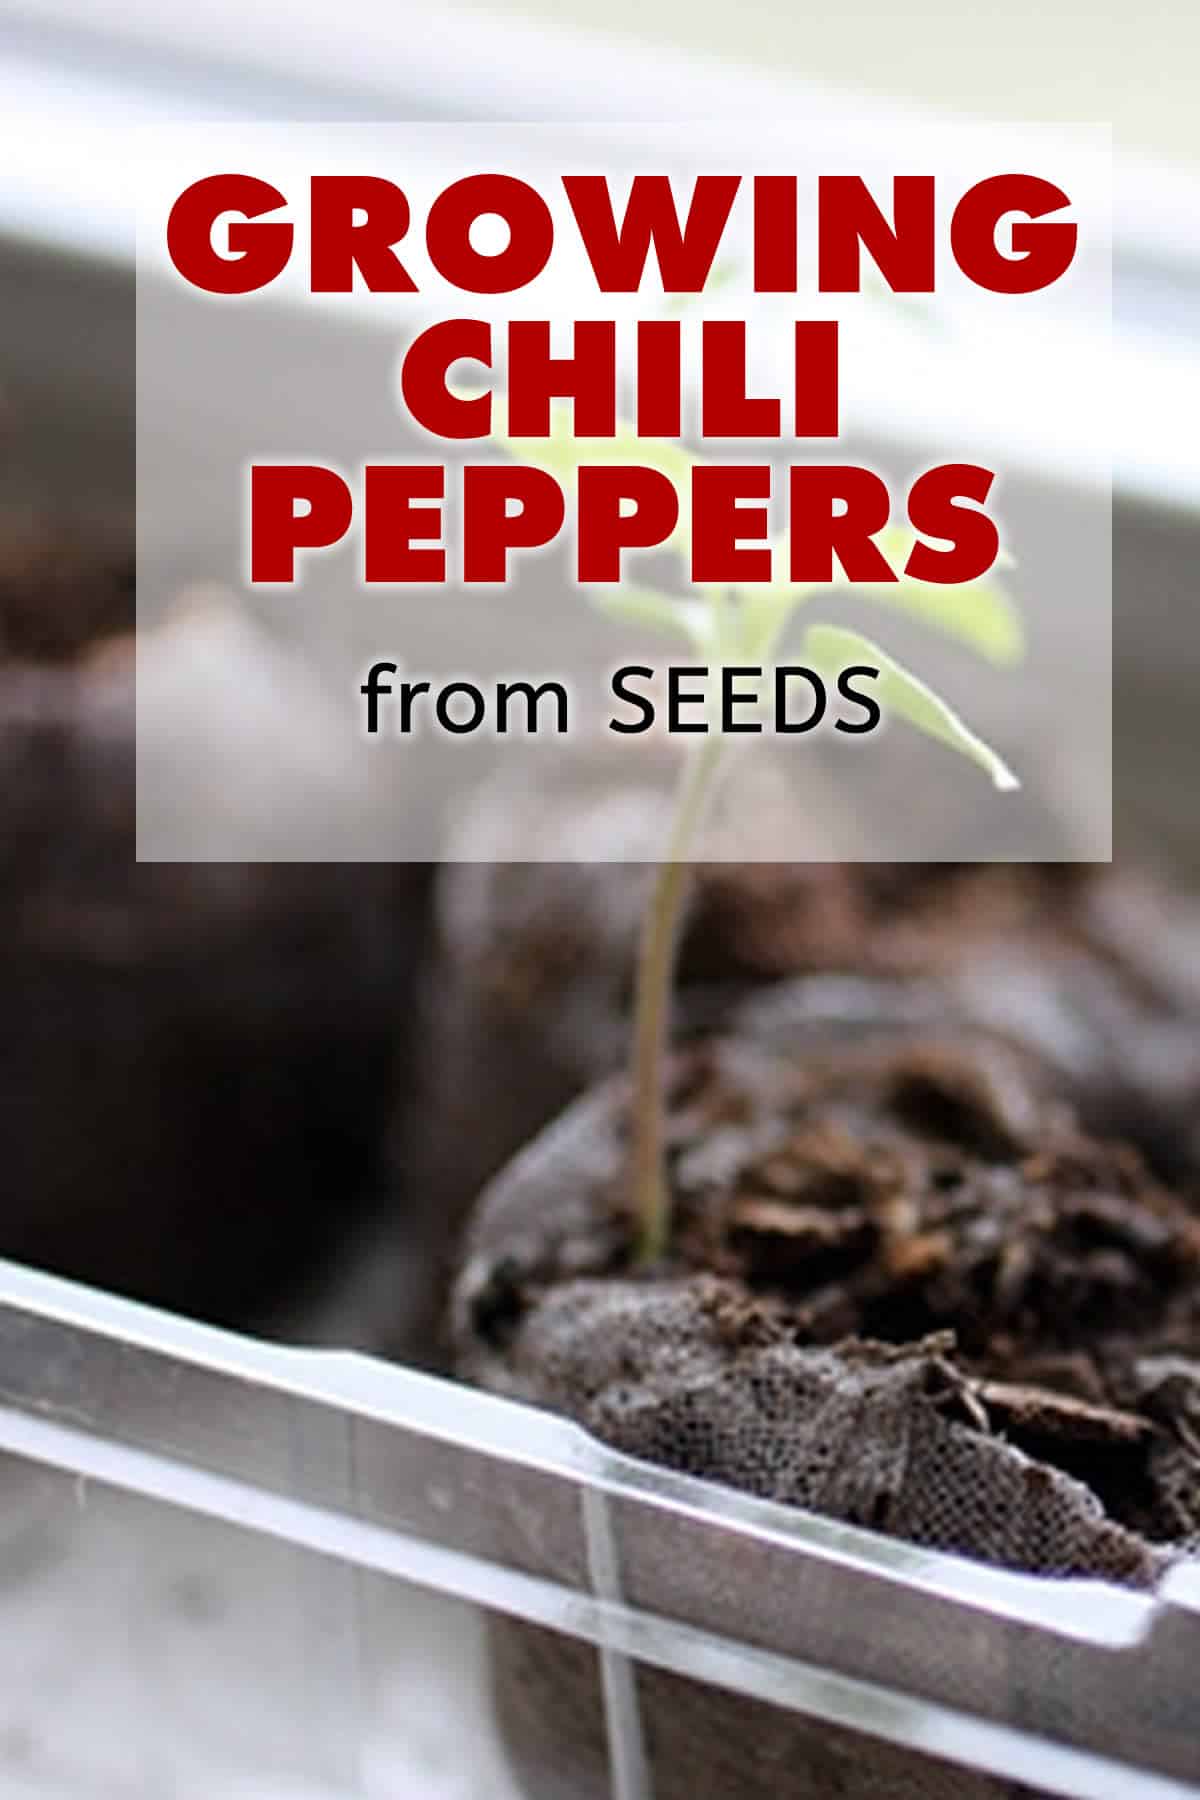 Growing Chili Peppers from Seed